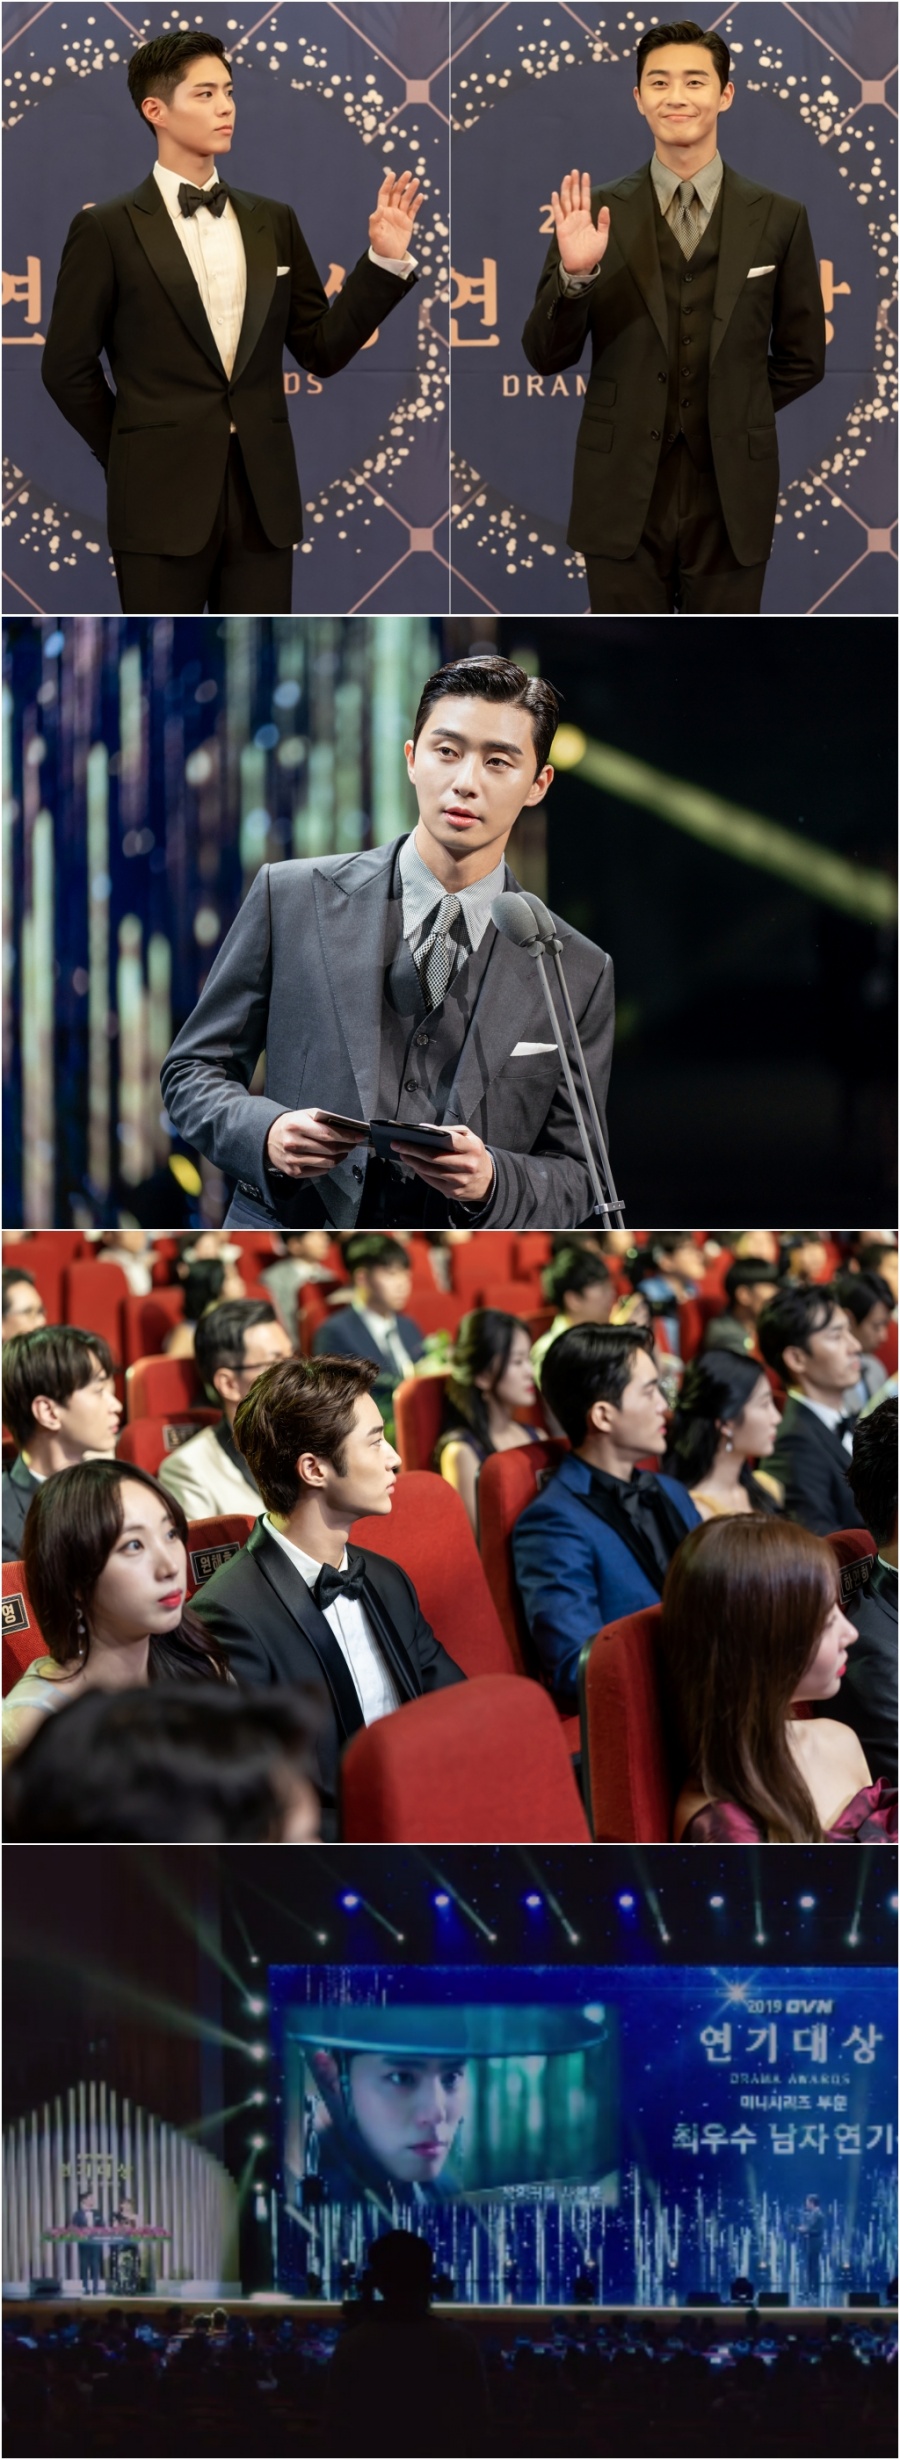  Park Bo-gum and Park Seo-joon met at Youth Records.  In the TVN wall painting drama Youth Records, which airs on May 5, Park Bo-gum and her predecessor and top star, Park Seo-joon, will be featured at the lavish year-end awards ceremony.Struggling to achieve his dream, Sahye-jun succeeded in the medical drama Gateway, followed by the drama The Return of the King.  Even in the midst of a busy daily life, Sahye-jun continues to make a successful path to success, taking on both work and love, pledging to be stable and abiding love.Finally, on the path of a superstar, Hye-jun Sa hye-jun attends the acting awards ceremony.  Park Bo-gum catches the eye with dazzling visuals in a photo released by the team ahead of the broadcast.  Park Seo-joons unique aura, which features a special cast of Sahye-juns model predecessor and top star, Song Min-so, also excites.  The perfect two-shot, completed by Park Bo-gum and Song Min-sos Park Seo-joon at Sahyejun Station, raises expectations for the broadcast.It is also interesting to see how the tension between Won Hae-hyo (Woo-seok) and Park Do-ha (Kim Kun-woo) is strong, waiting for the best male actor award.  Whether Sahye-jun can beat them and win the best male acting award, or whether Won Hae-hyo and Kim Kun-woo can beat Sahye-jun and enjoy the glory.In Youth Records, which is broadcast on the same day, Hye-jun Sahye-juns performance is depicted.  The production team begins the era of Sahye-jun.  Park Seo-joon makes a special appearance and makes the second act even hotter.  We look forward to his performance, which will add to the power of disassembly with top star Song Min-so, who has a special relationship with Sahye-jun.The ninth episode of Youth Records airs on tvn on May 5 at 9 p.m.